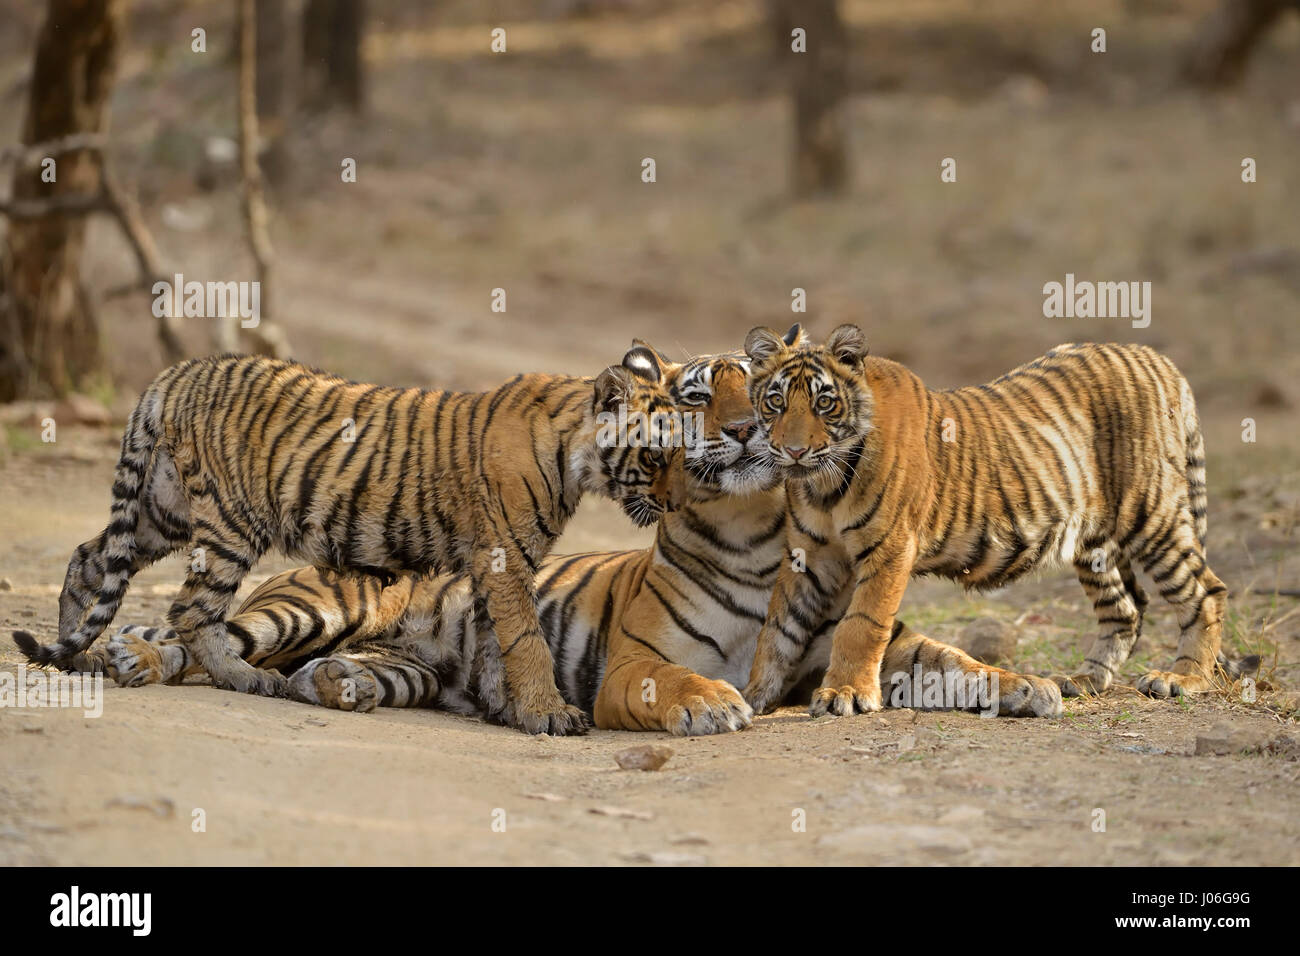 Bengal tiger, mother and cubs, sitting and nuzzling each other on a forest track in Ranthambhore tiger reserve, India Stock Photo